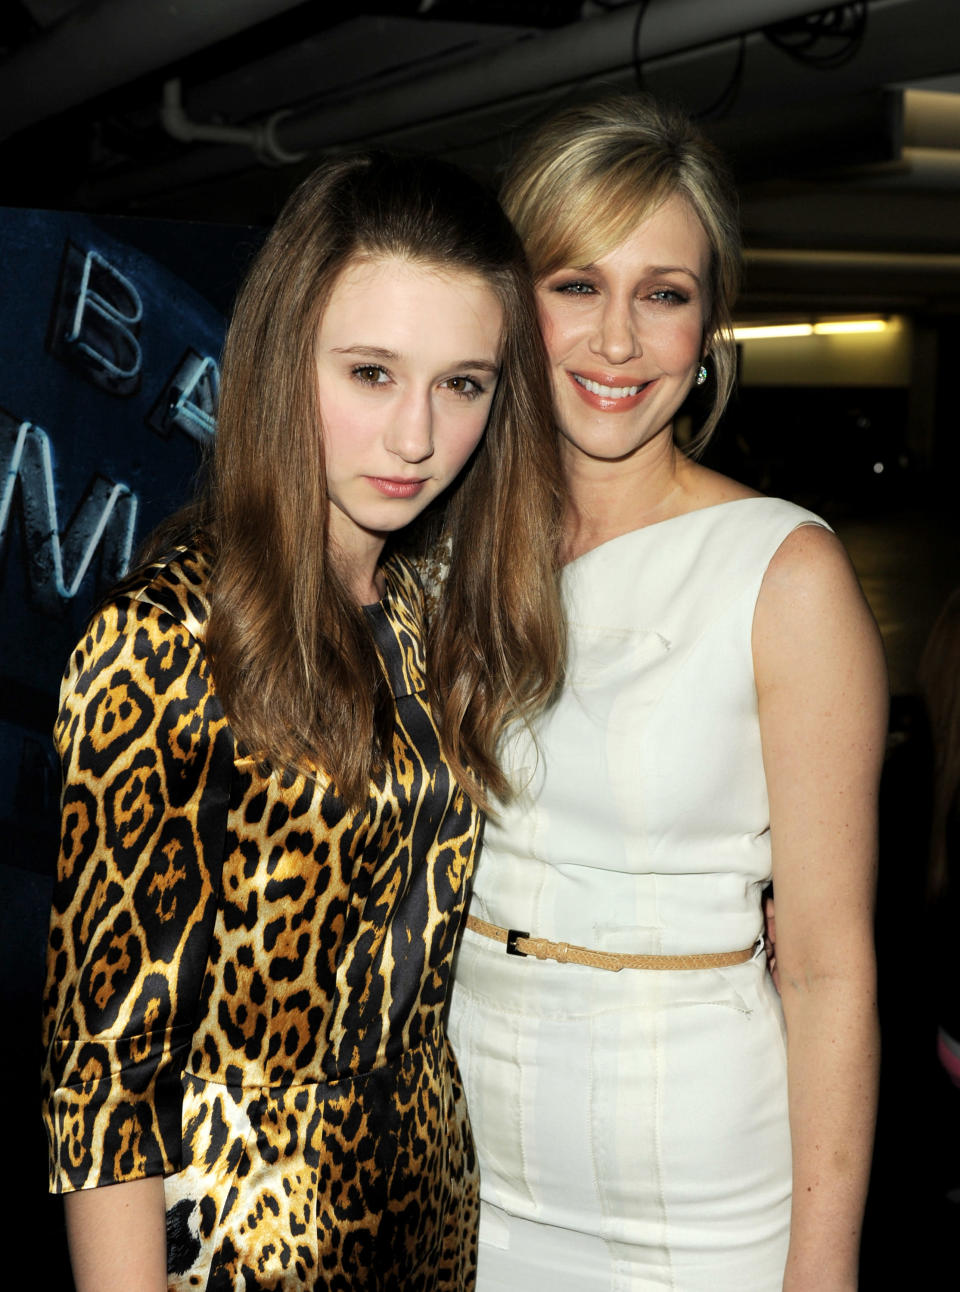 Twenty-one years her junior, actress Vera Farmiga’s sister, Taissa (left), is popularly known for her role as the moody teenager Violet in the miniseries "American Horror Story", which met critical acclaim. This year, she is to star alongside Emma Watson in the upcoming film "The Bling Ring". We can’t wait to see more of her! (Photo from Getty Images)